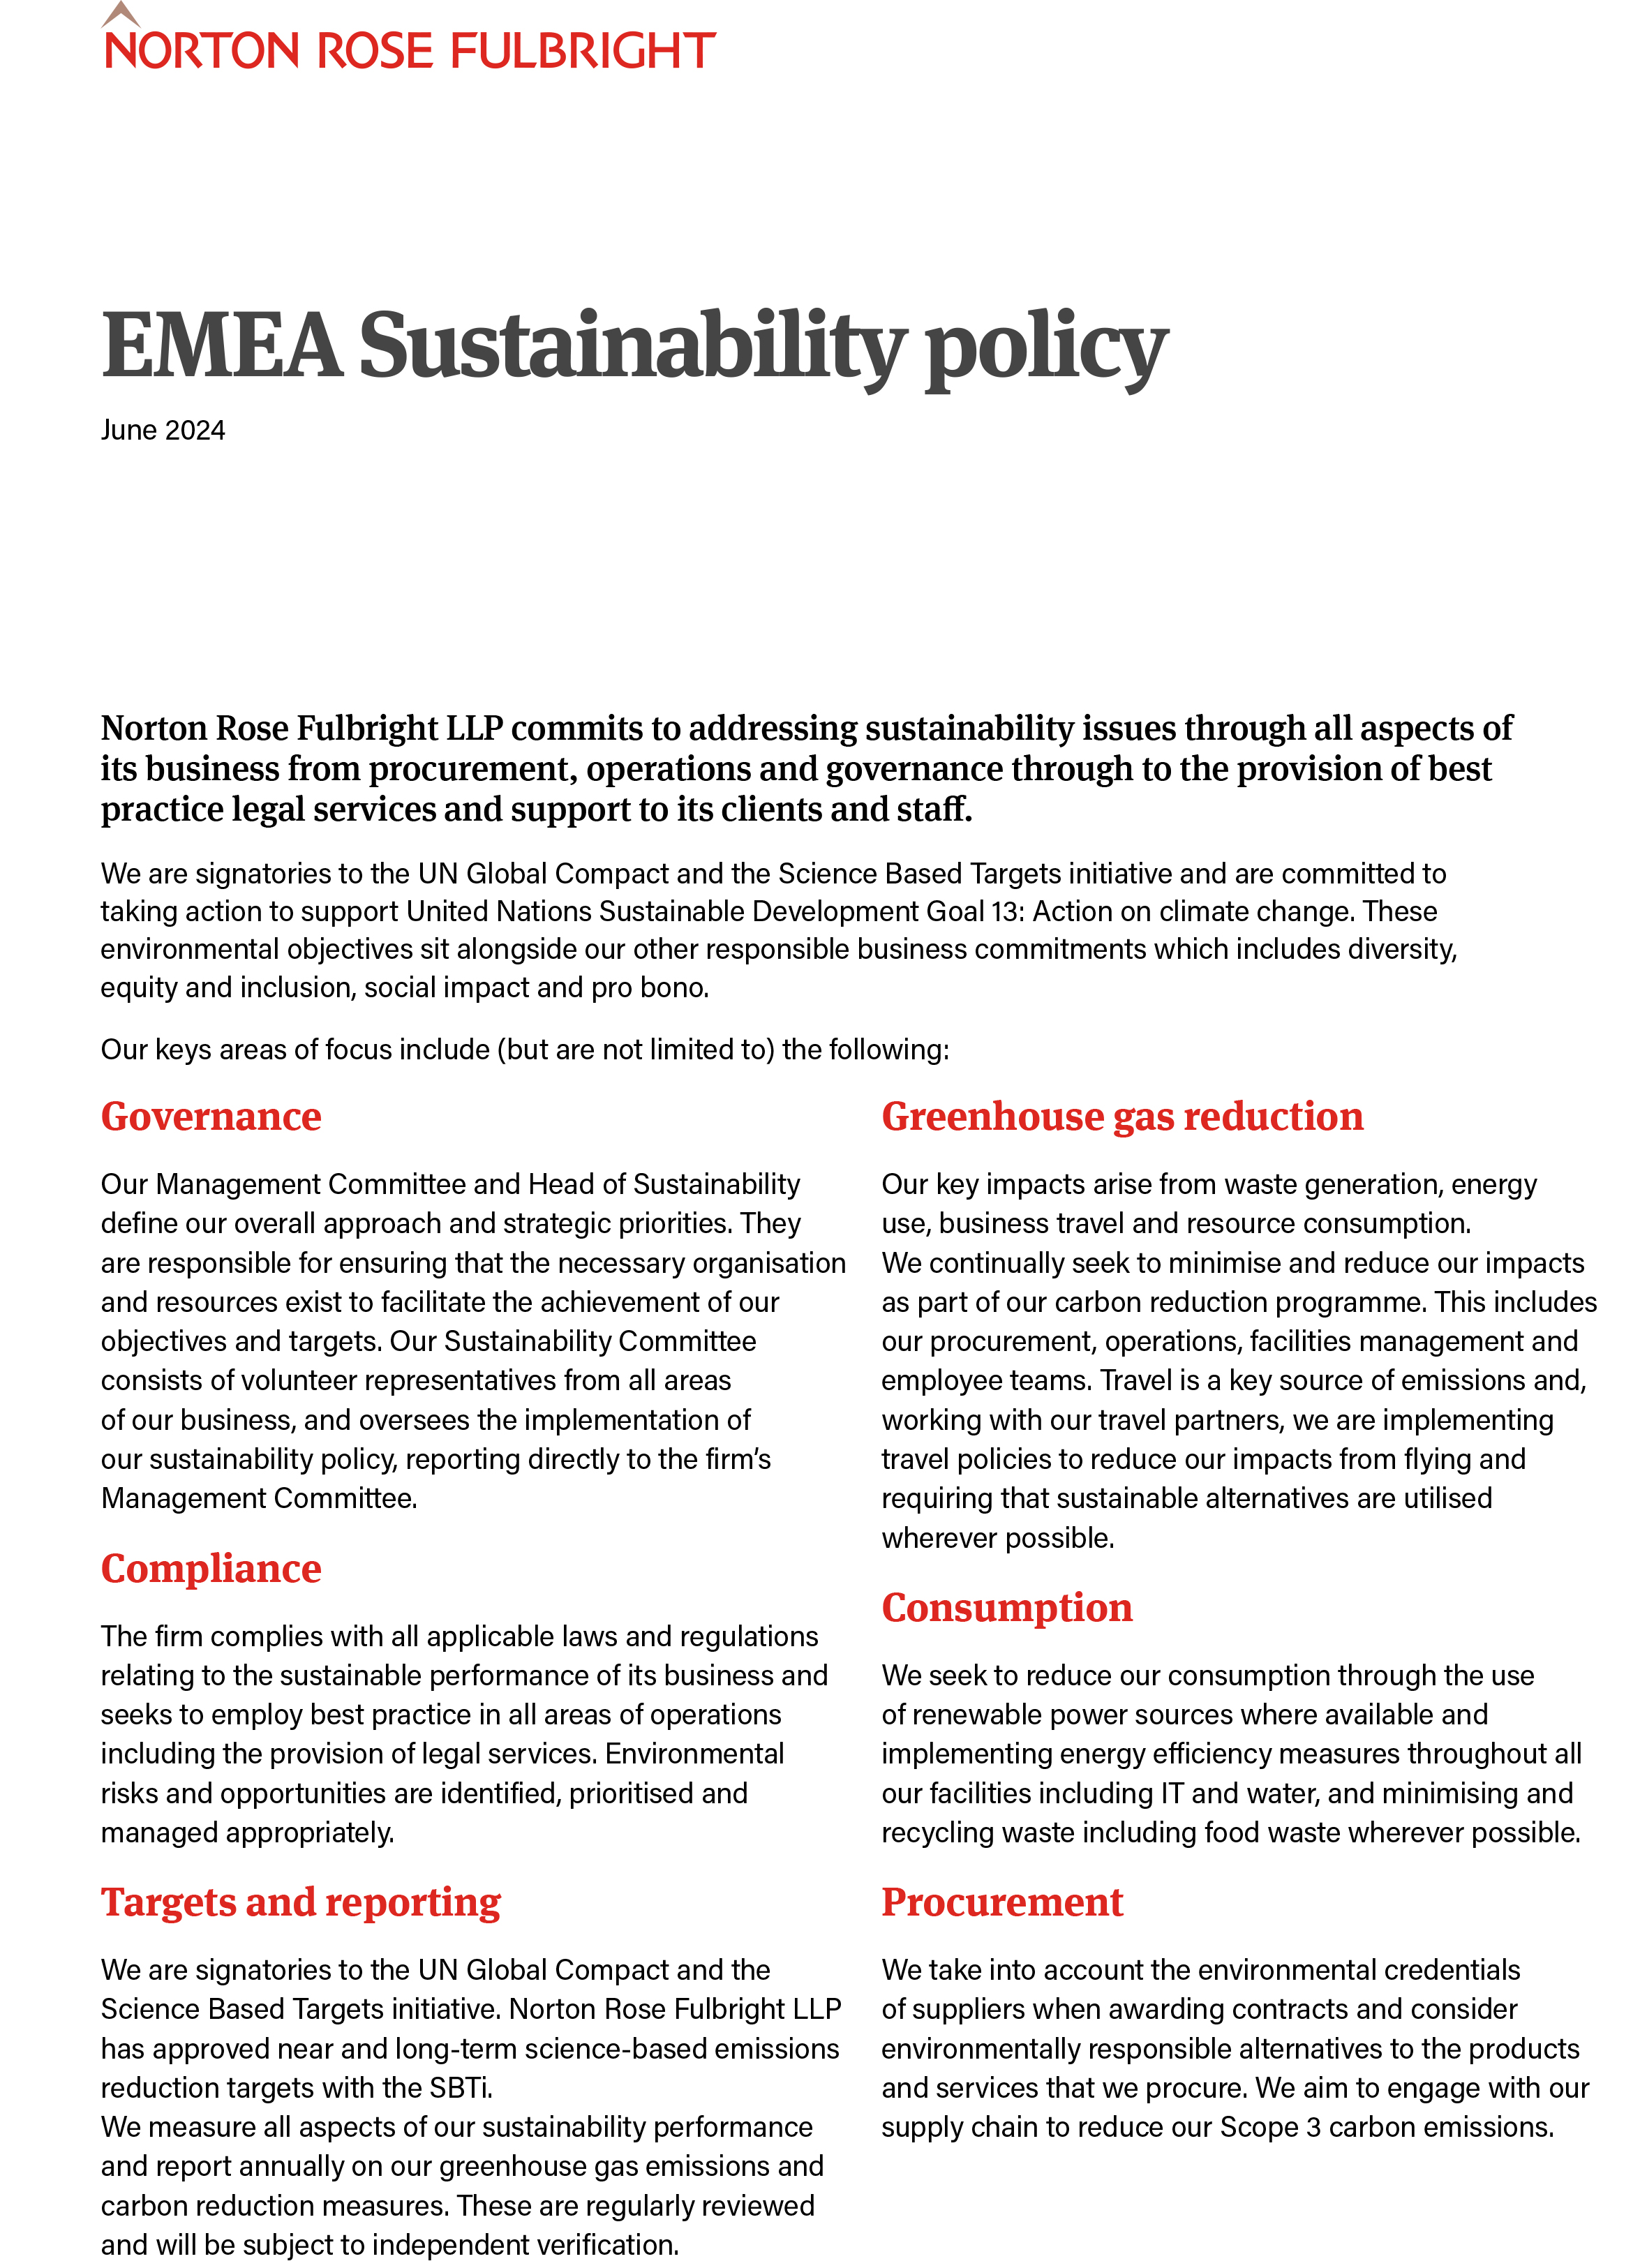 Front page of the EMEA sustainability policy